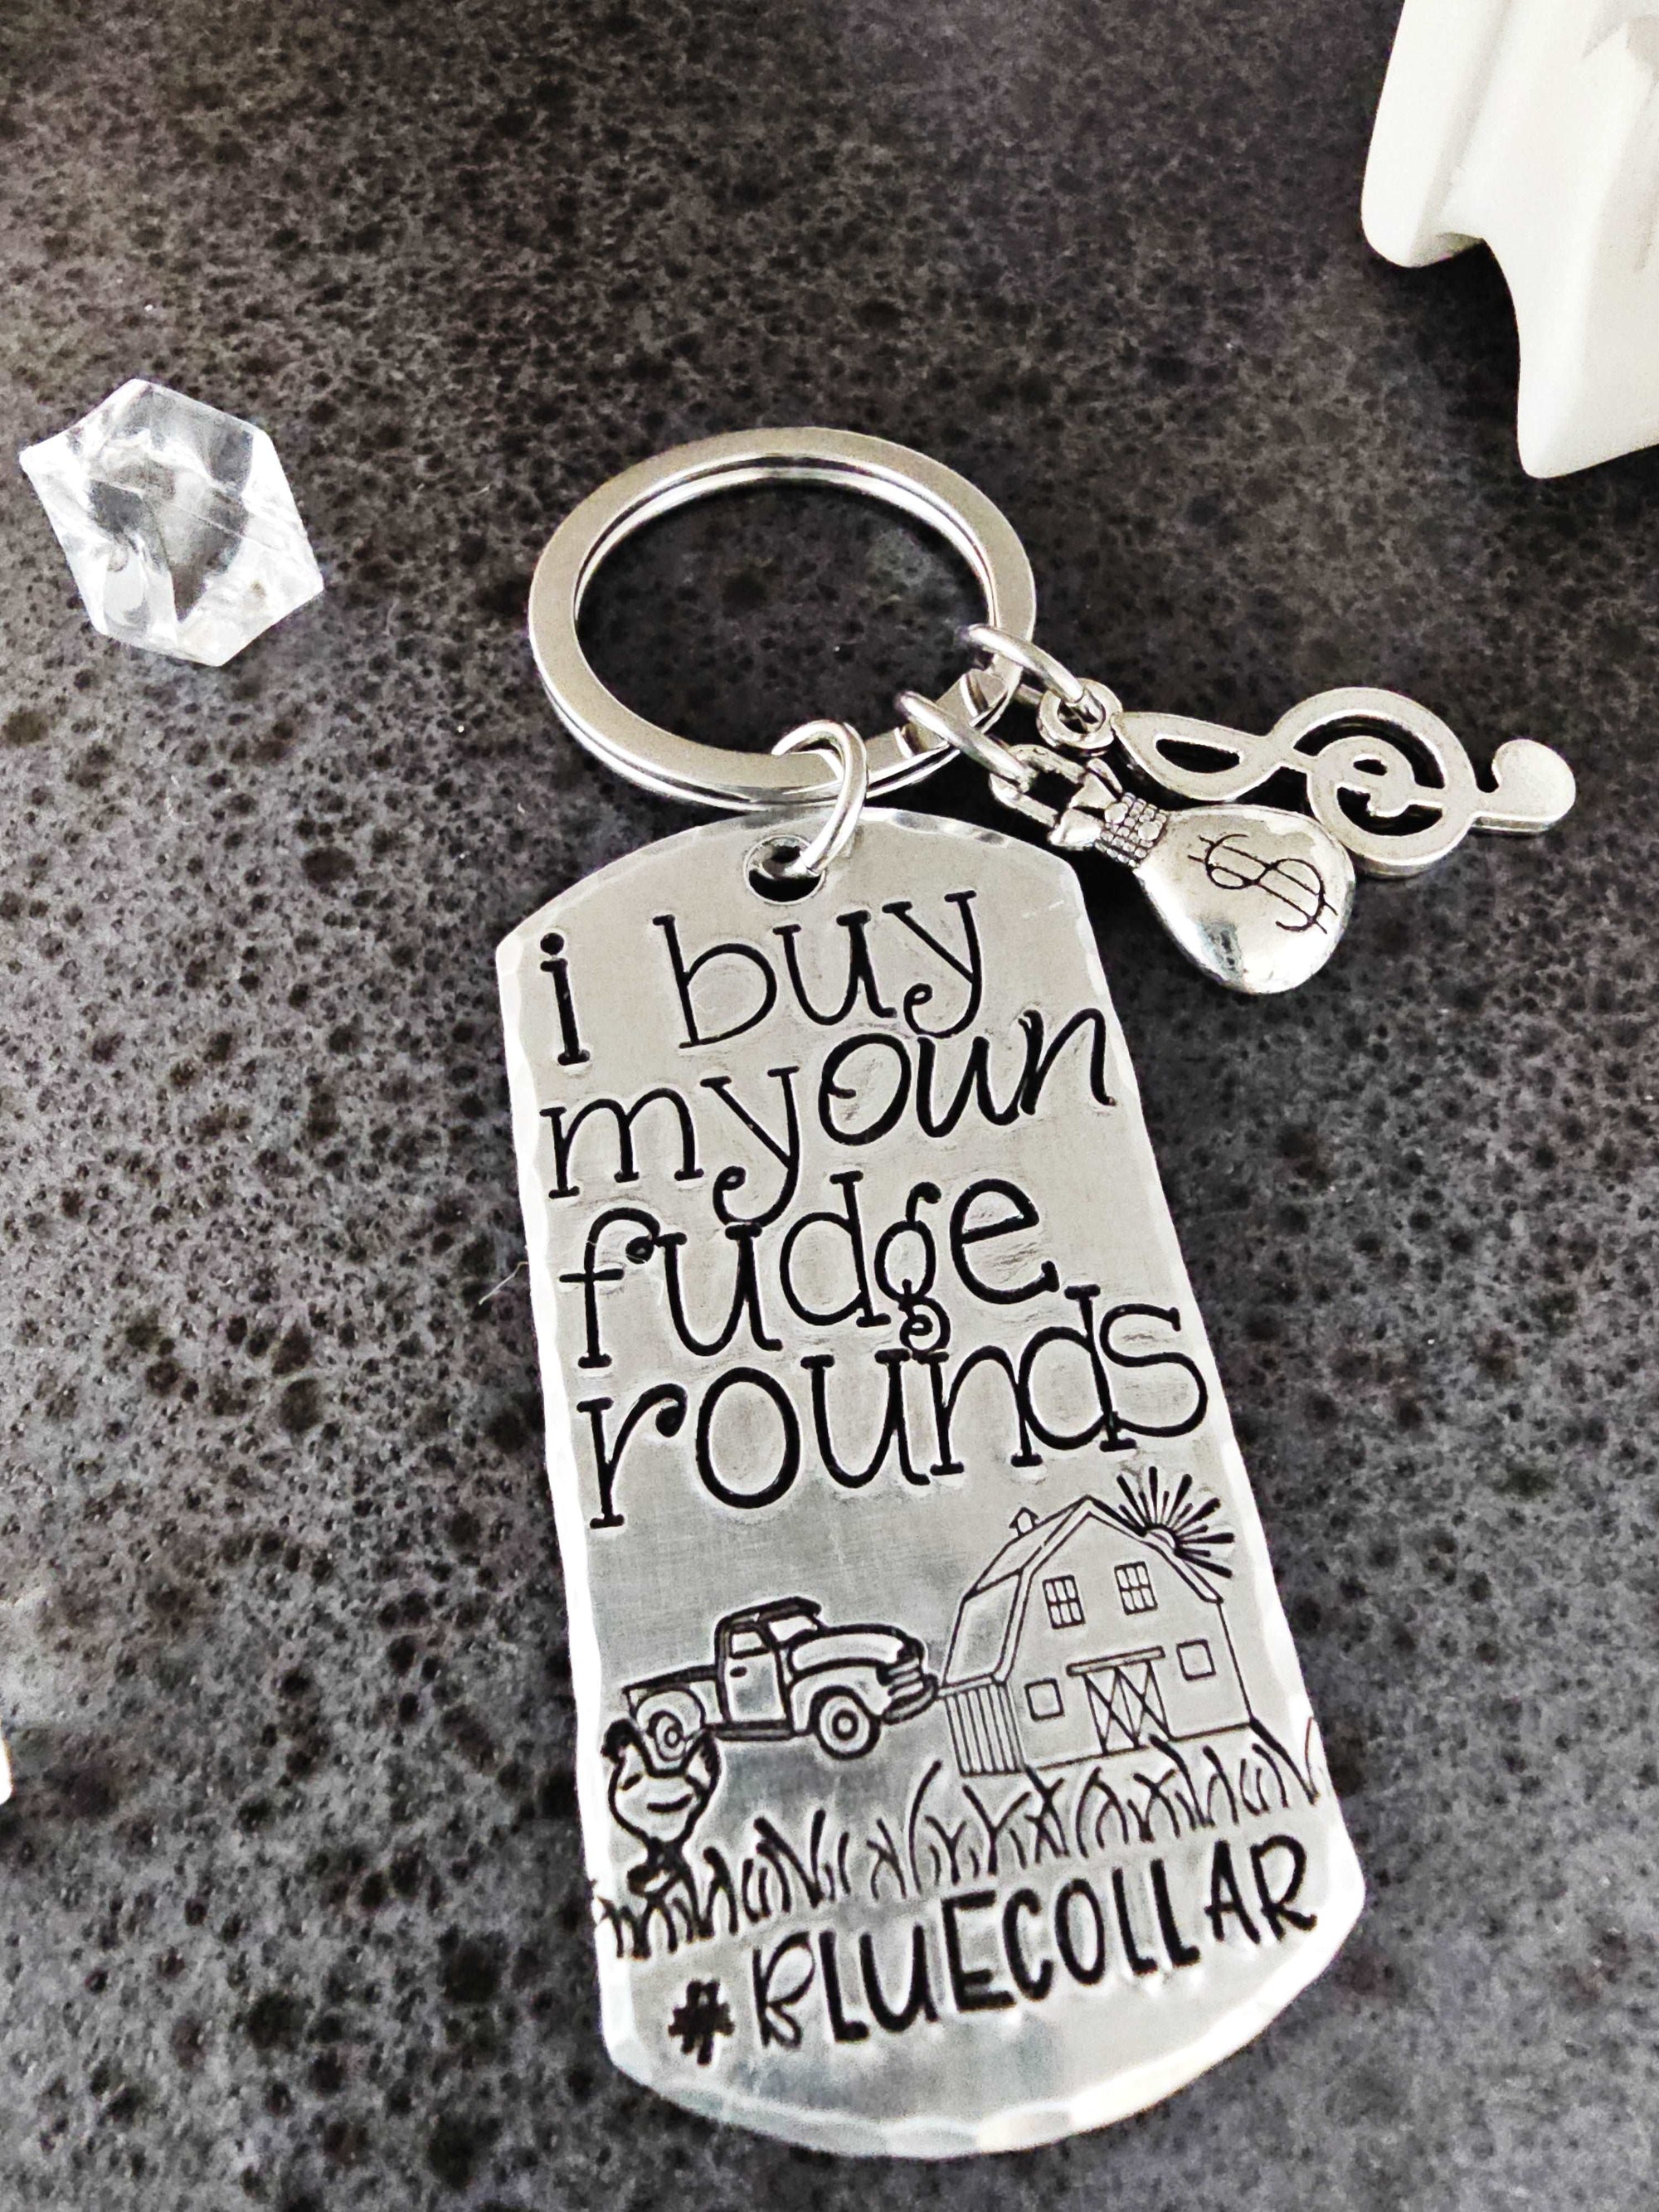 I Buy My Own Fudge Rounds Keychain, Anthony Oliver Music, Country Music Fan, Appalachian Music, Blue Collar